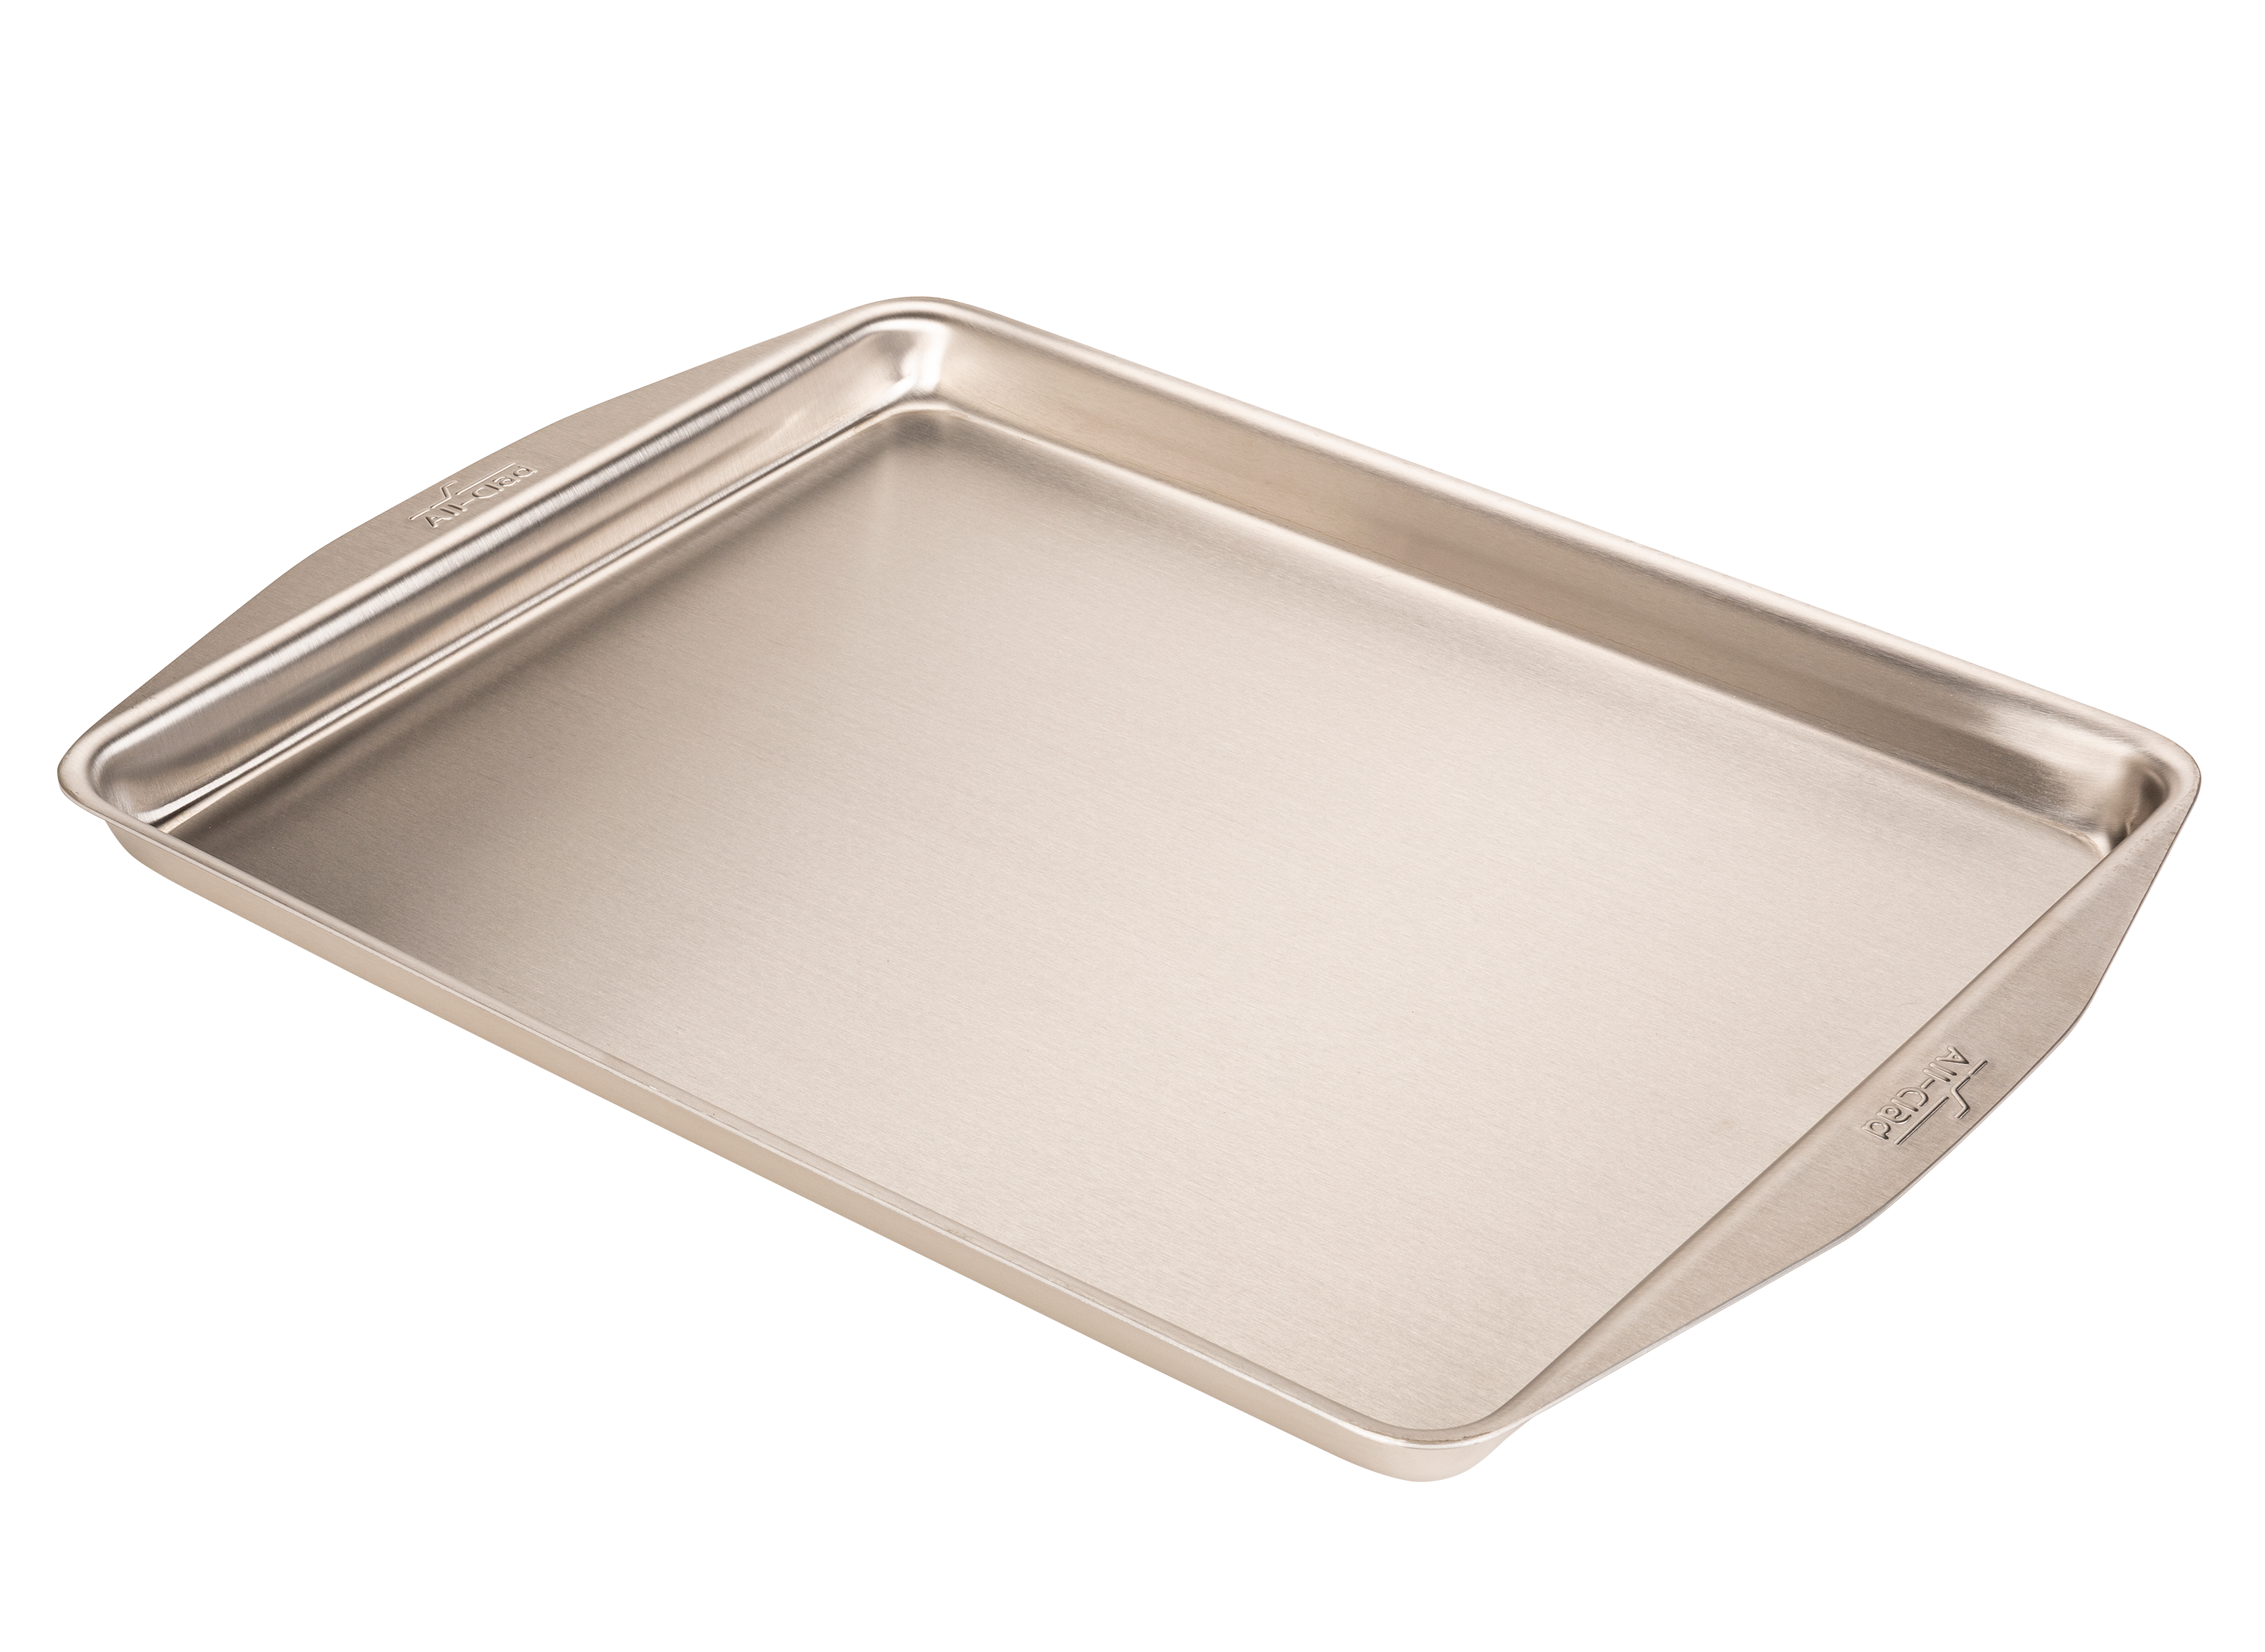 https://crdms.images.consumerreports.org/prod/products/cr/models/404306-sheet-pans-all-clad-d3-stainless-jelly-roll-pan-10024342.png